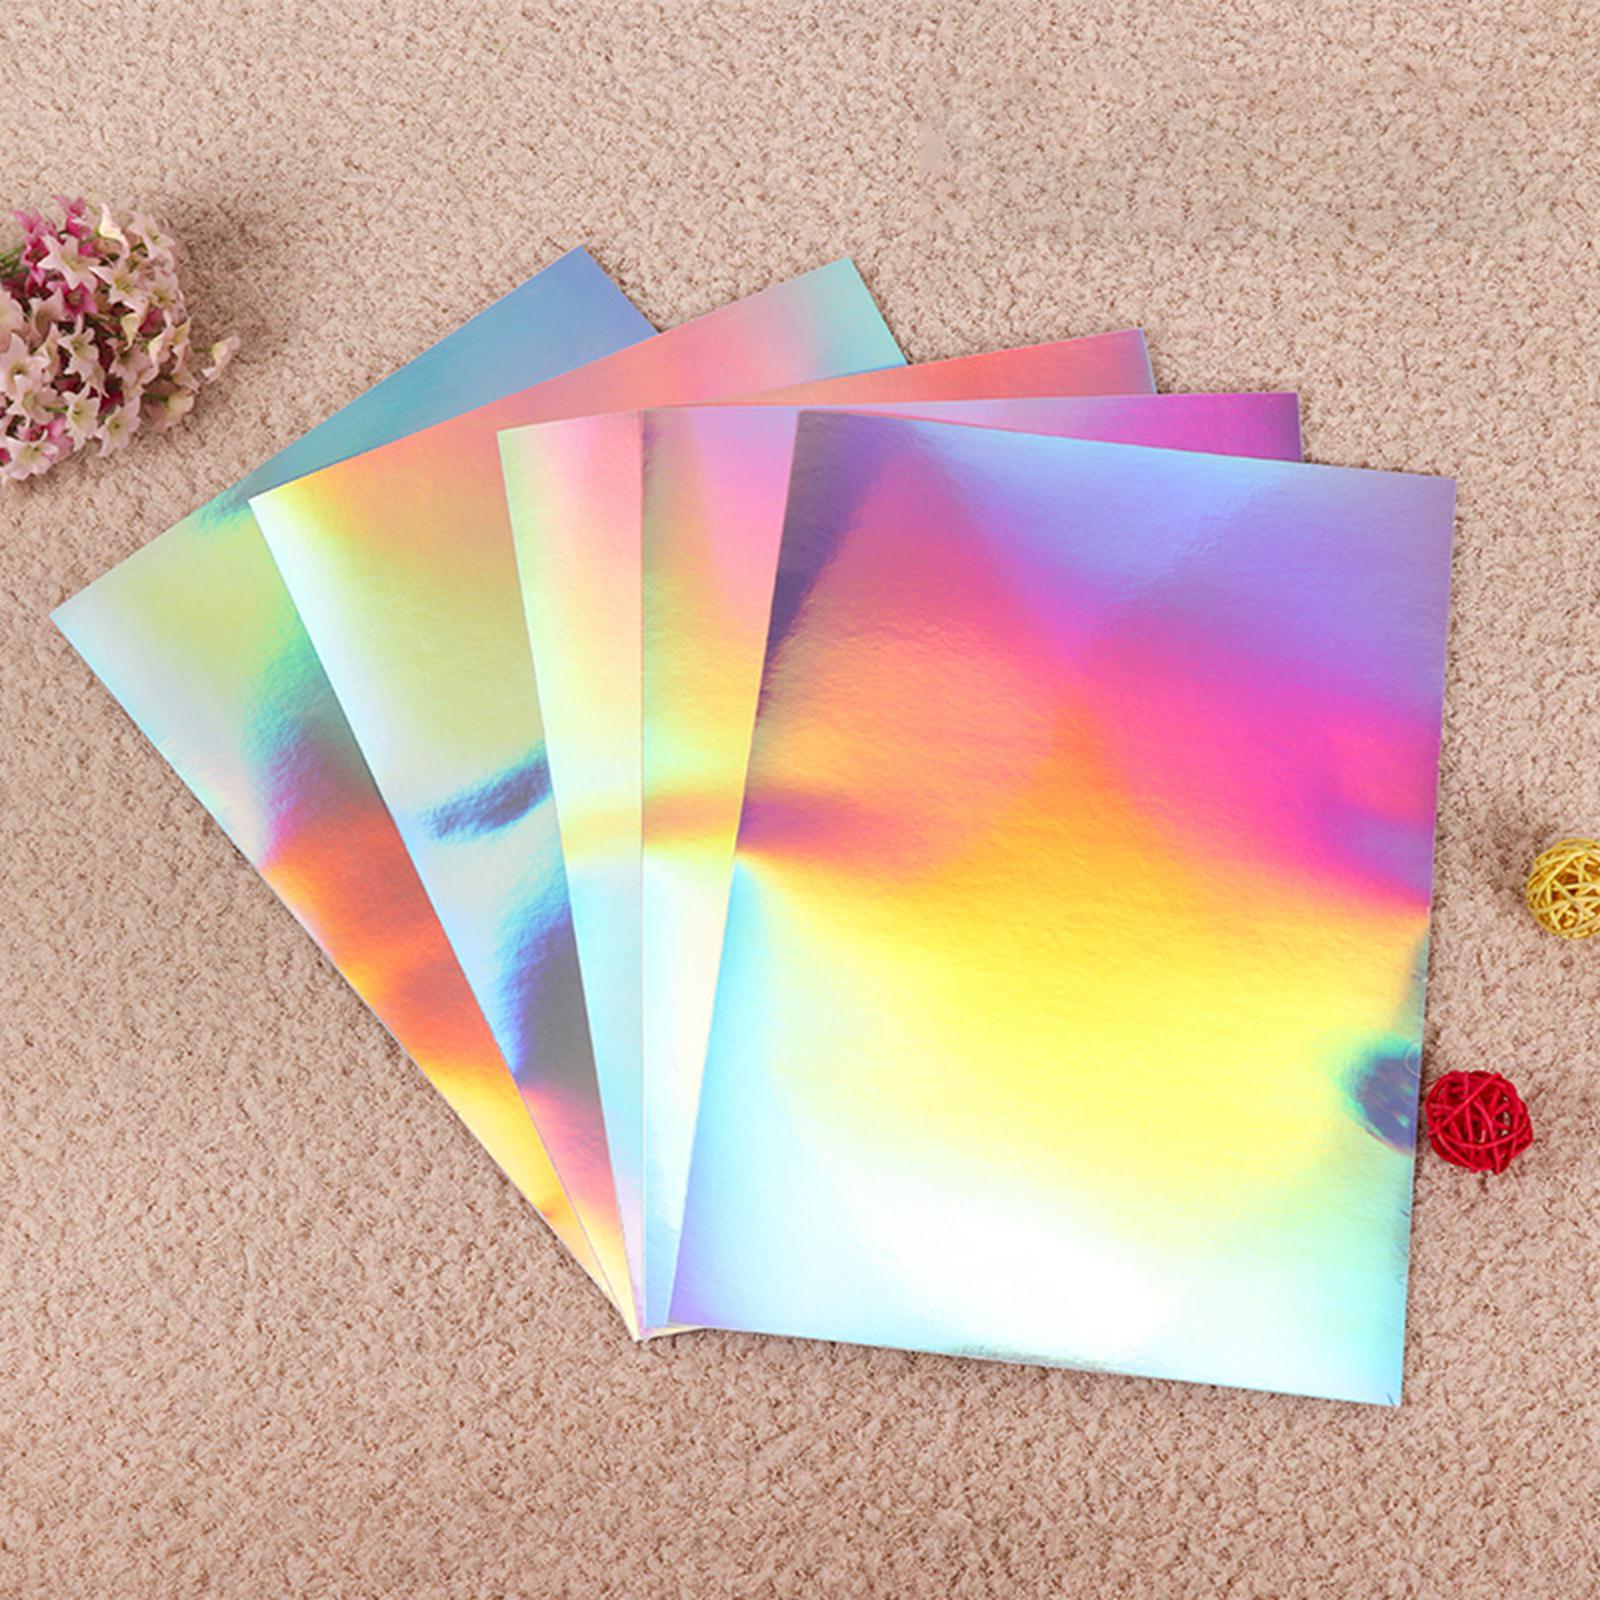 Holographic Sticker Paper Clear Printing Printable Glossy for